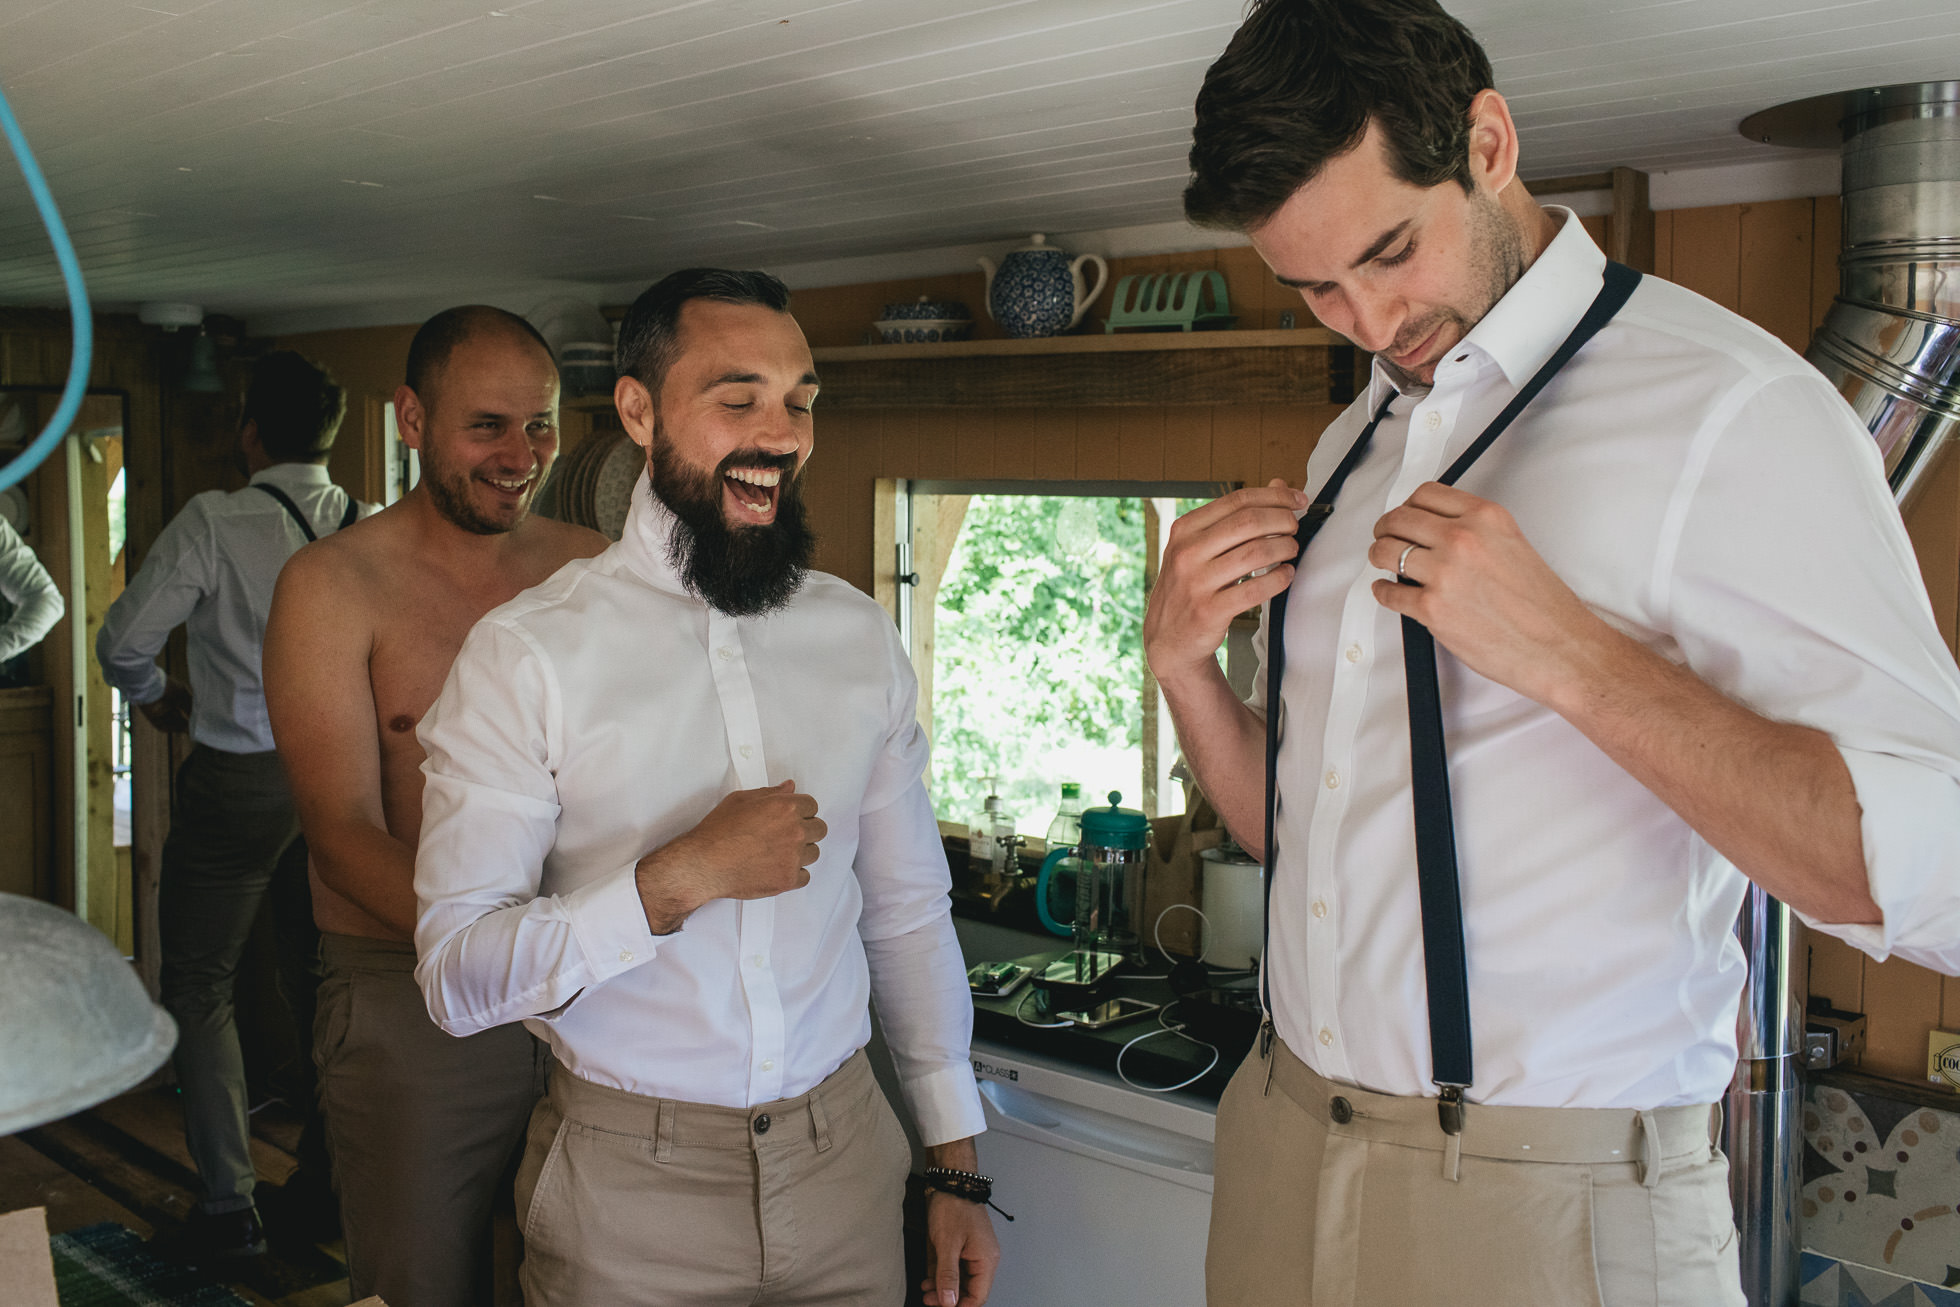 Groom and groomsmen laughing together